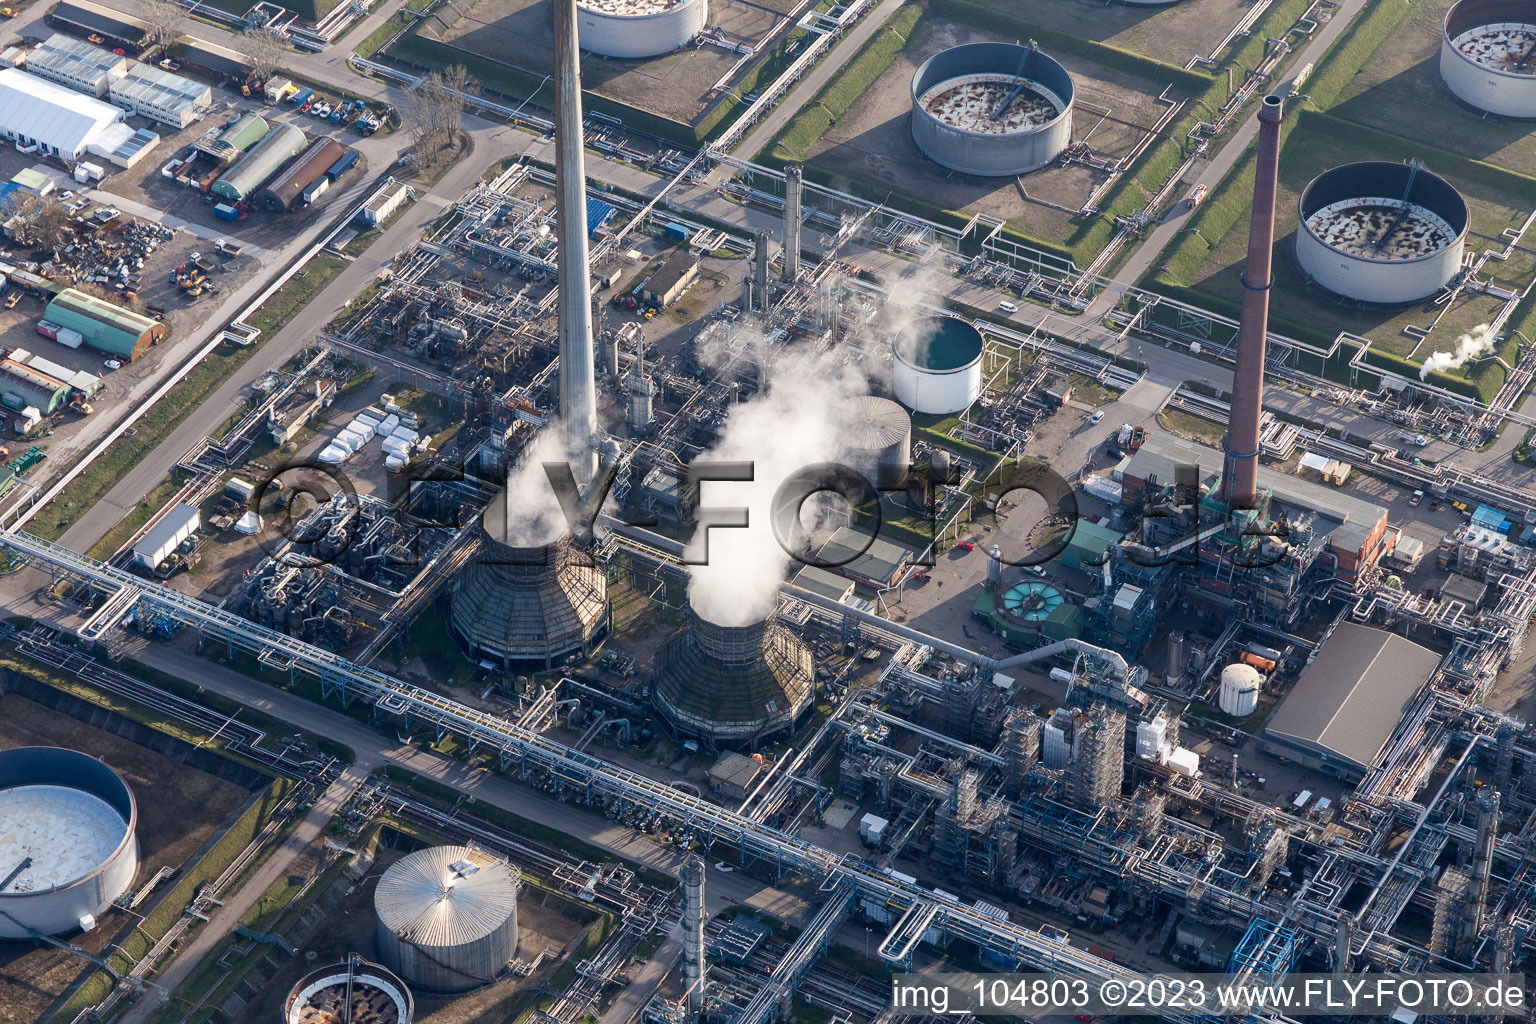 Oblique view of MIRO oil refinery in the district Knielingen in Karlsruhe in the state Baden-Wuerttemberg, Germany